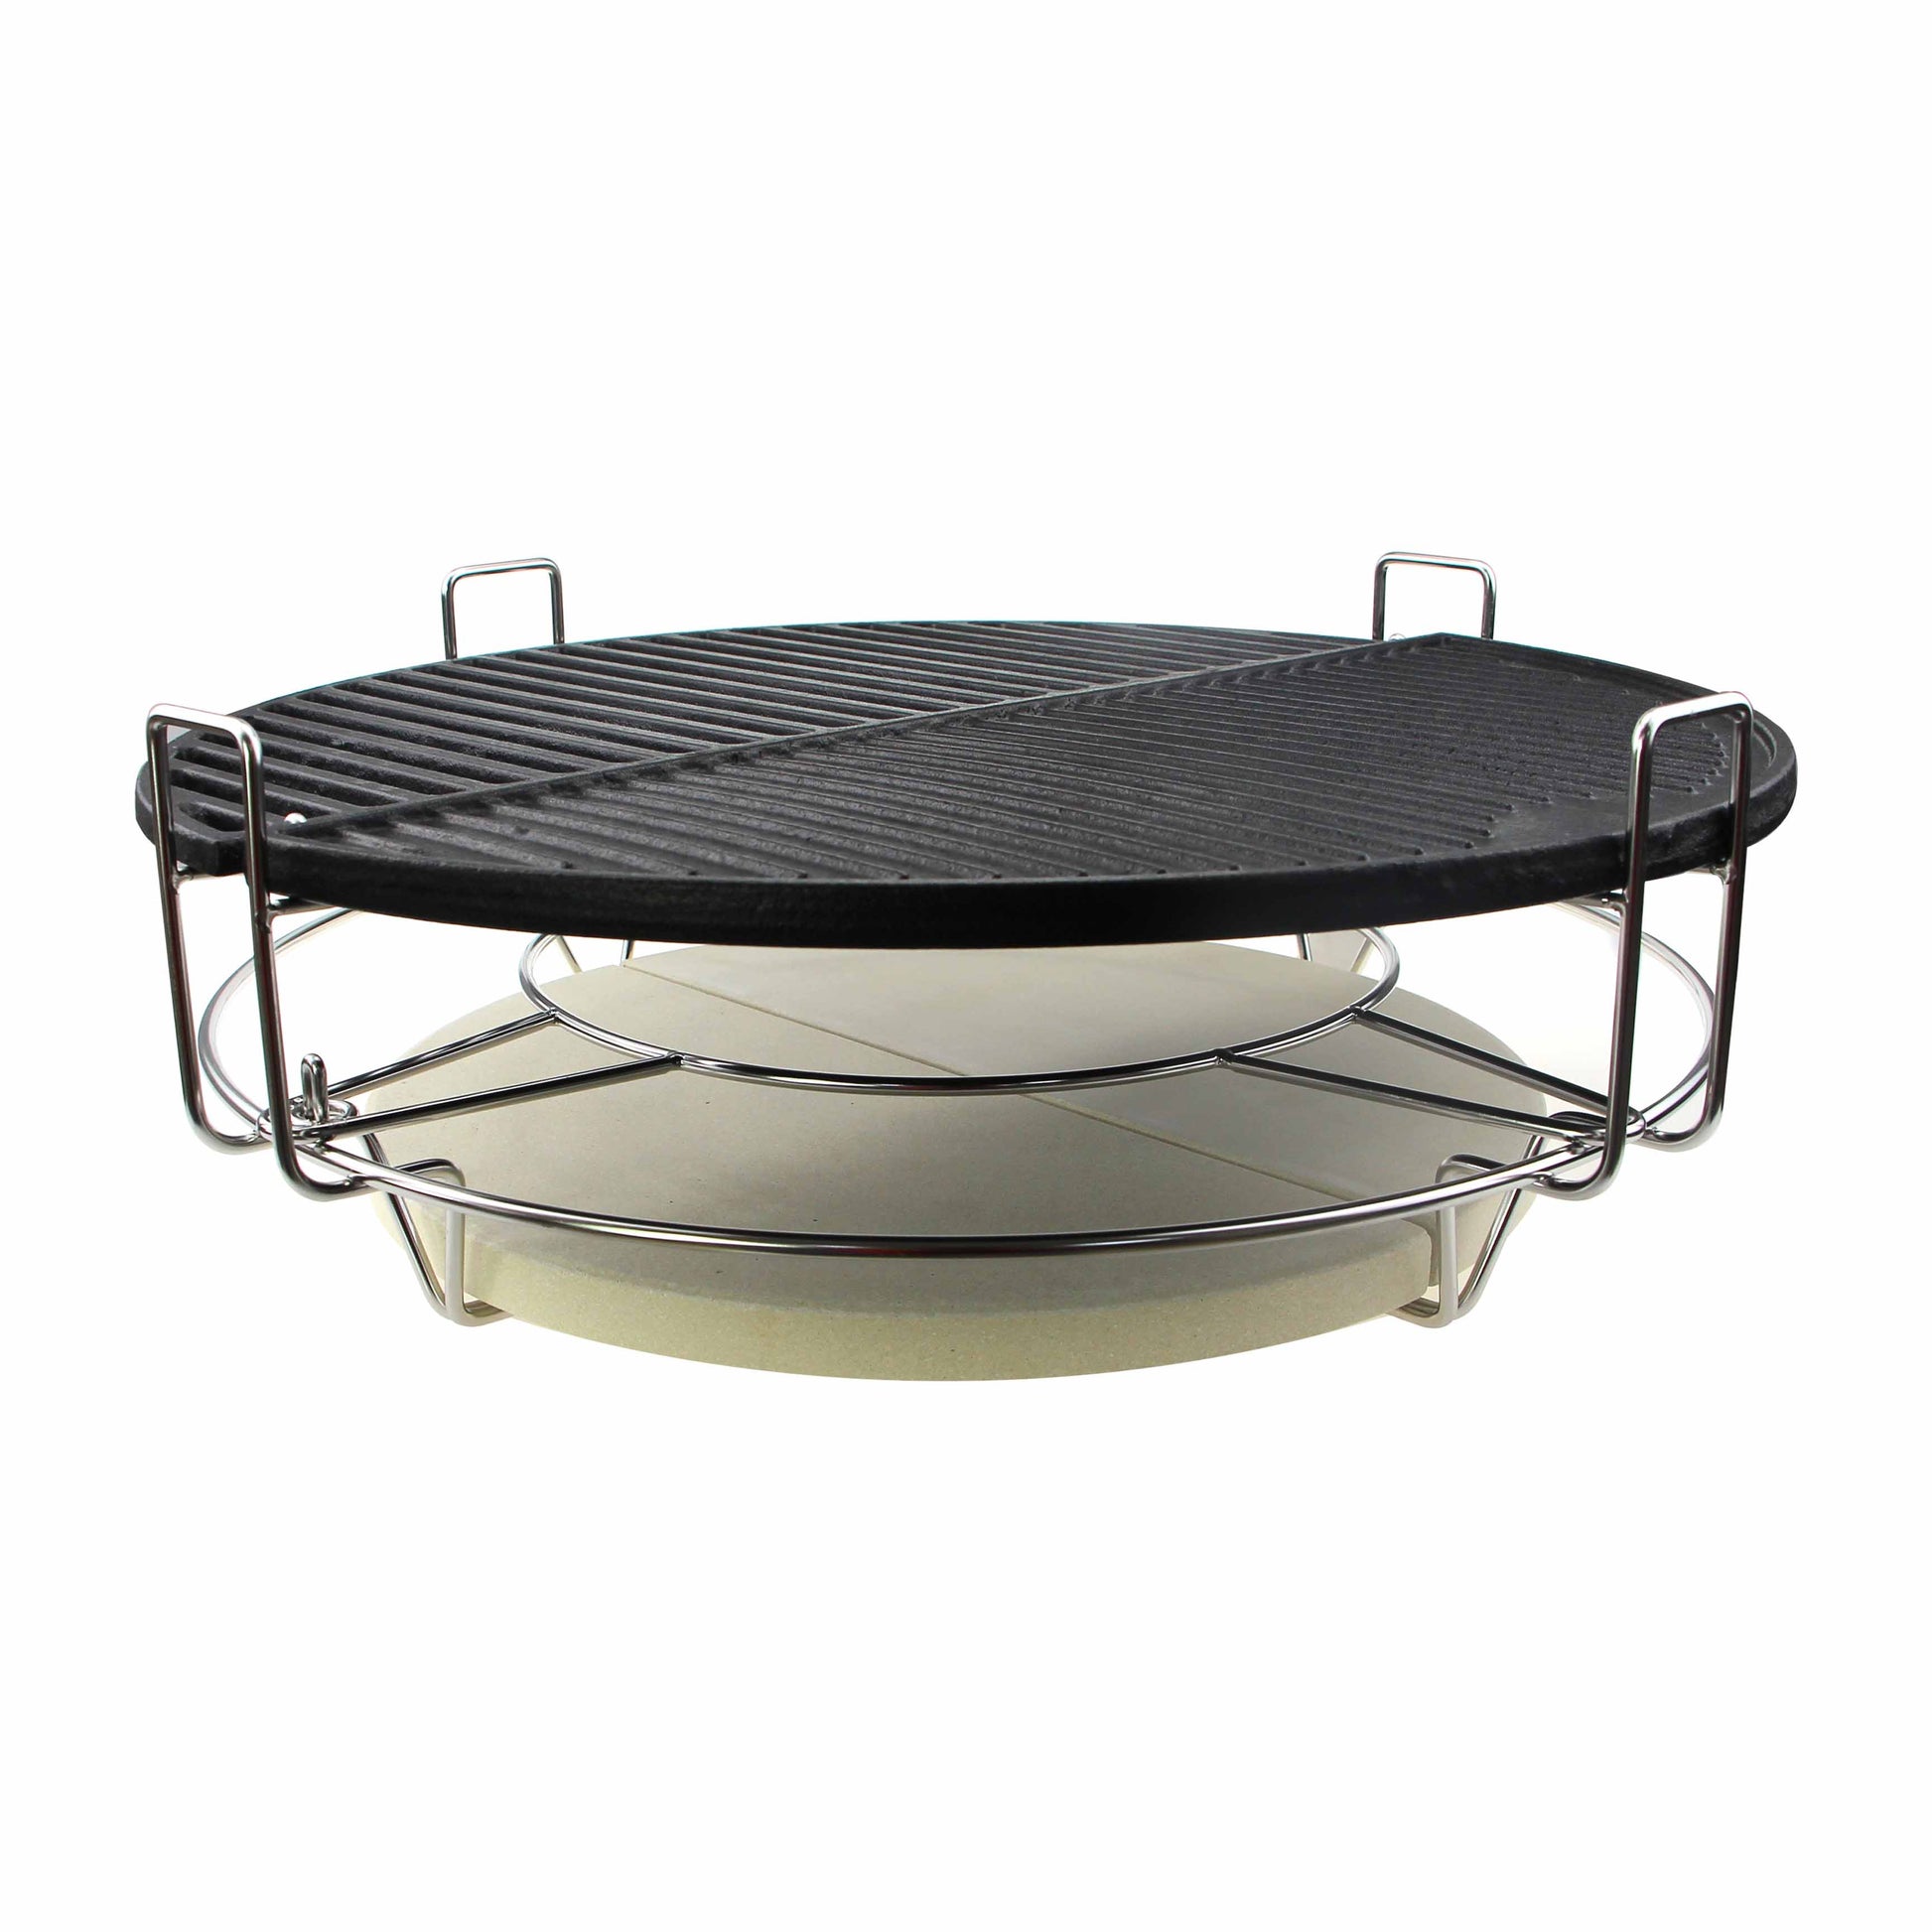 Flexibel Cooking System Cast Iron Large + Dutch Oven - kamadogrills